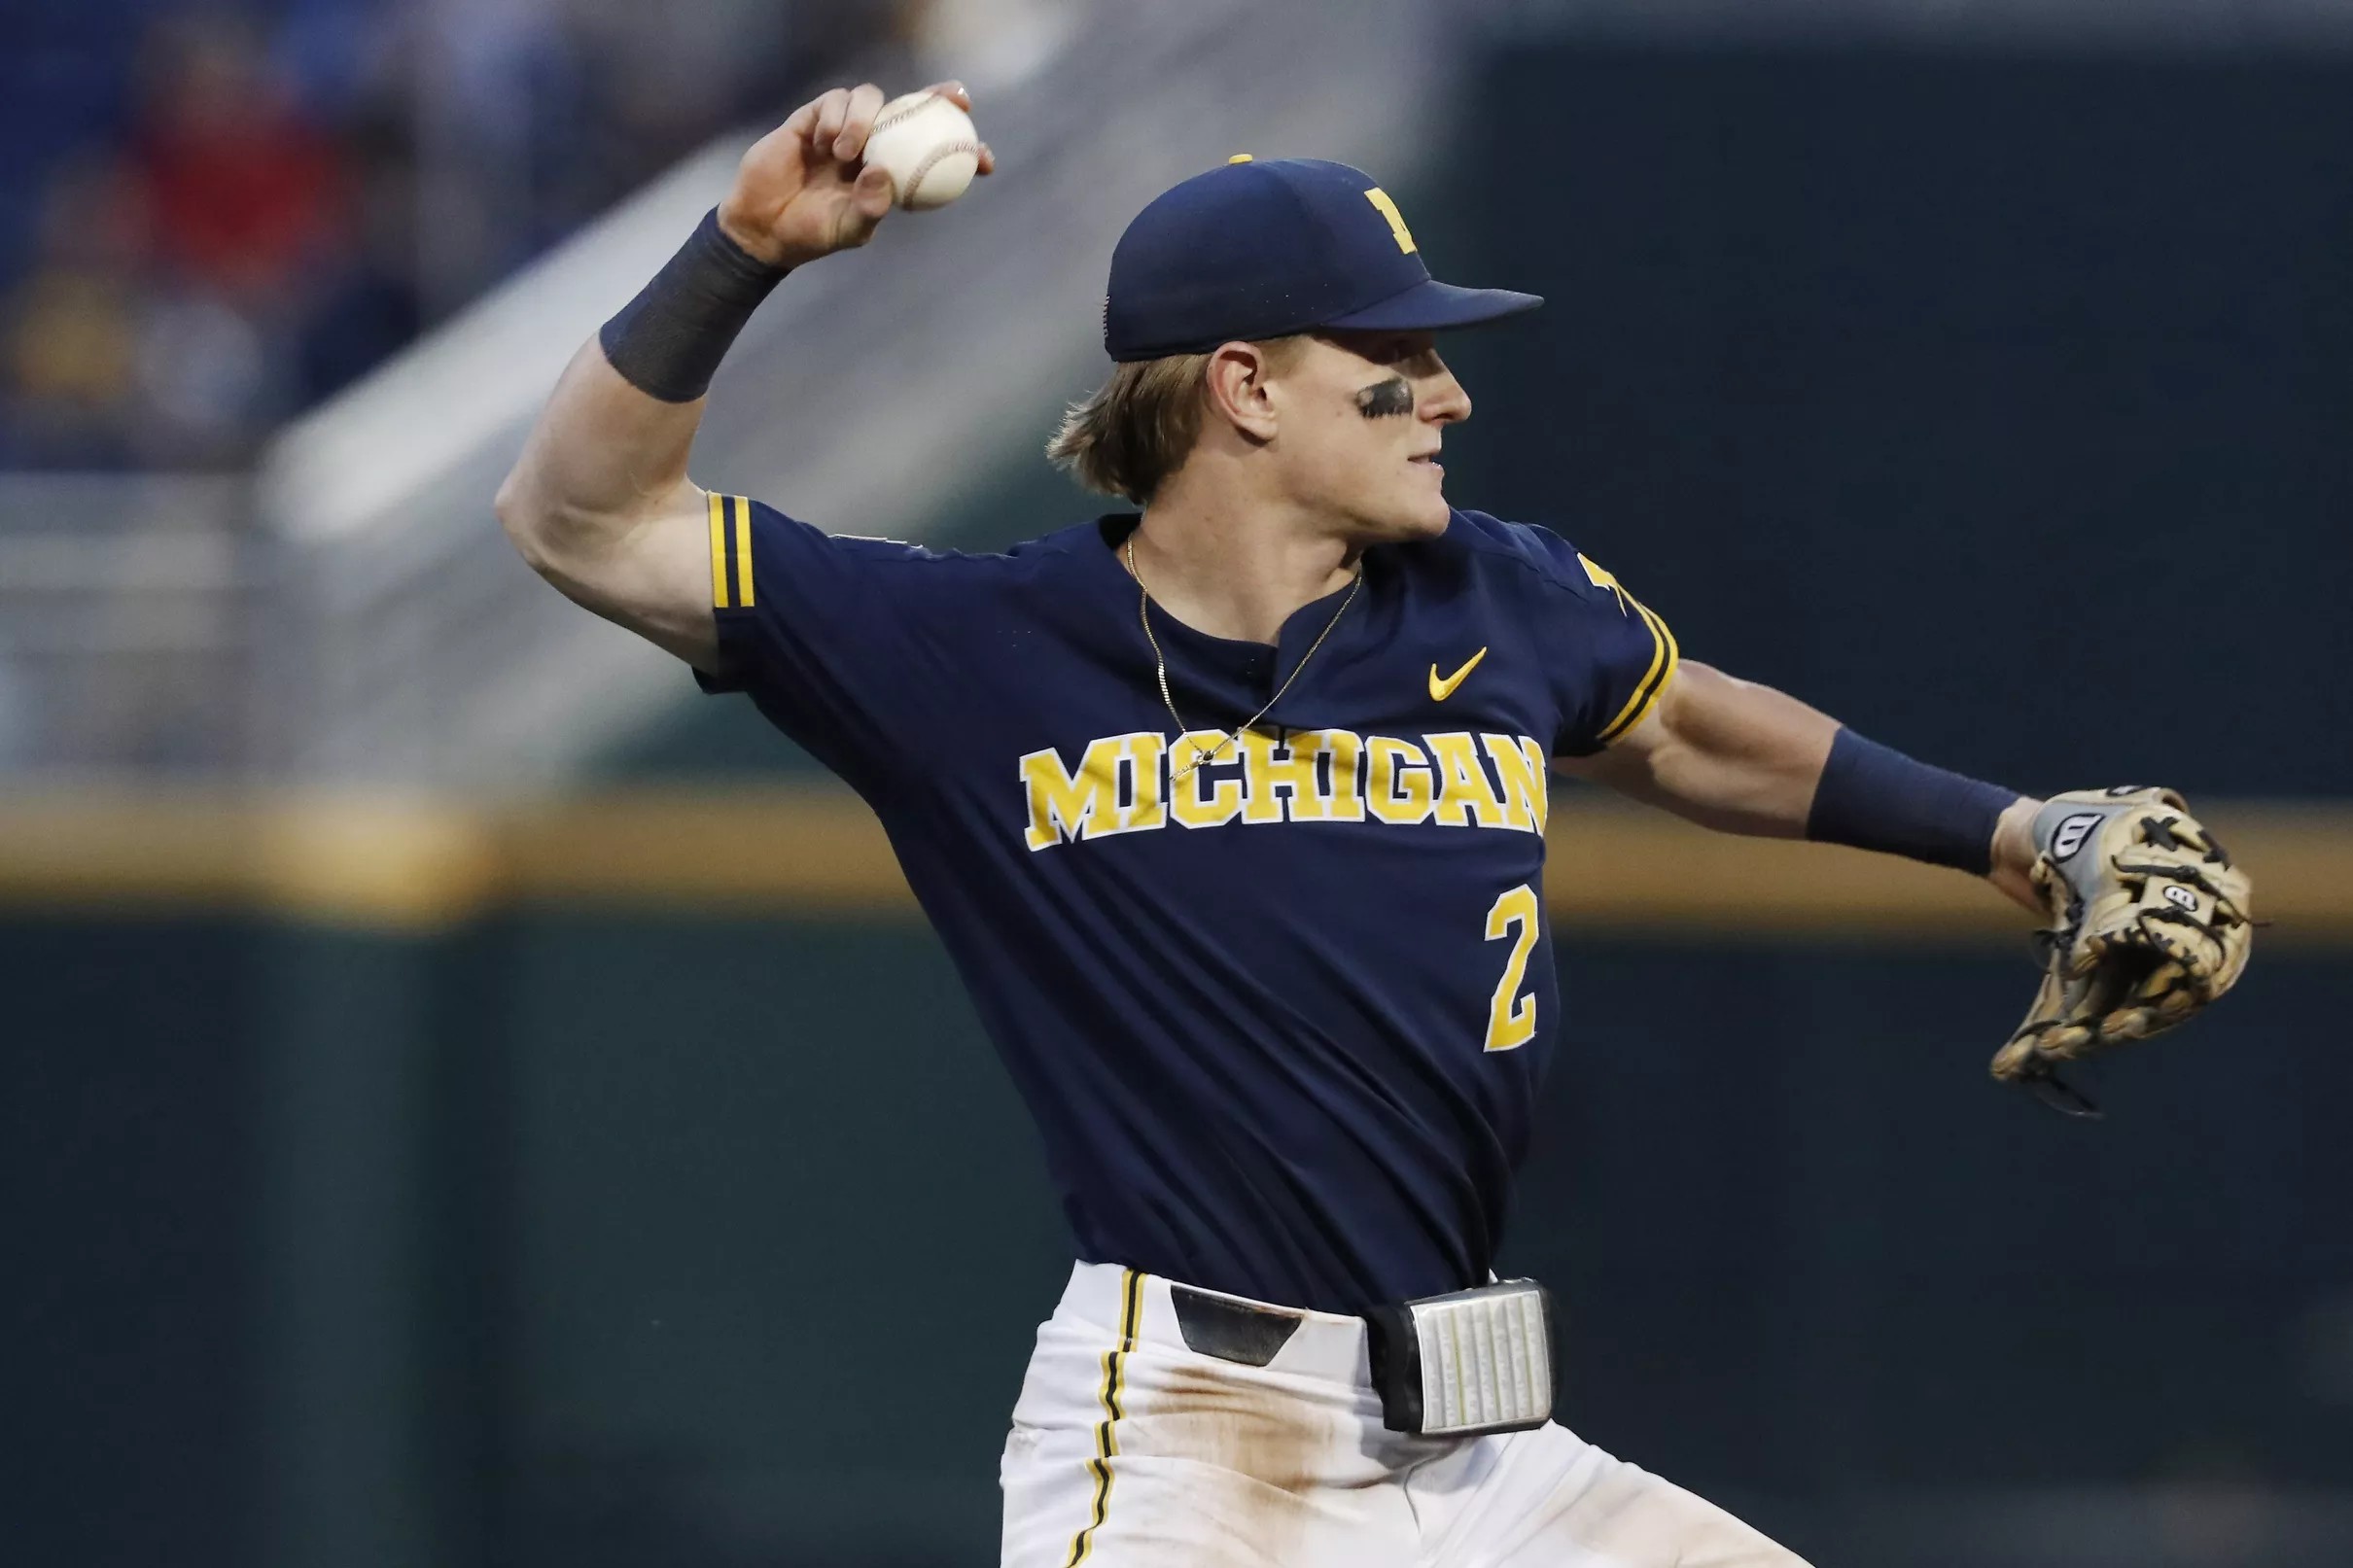 Saturday Recaps: Michigan Baseball moves to 3-0 in 2020 with pair of